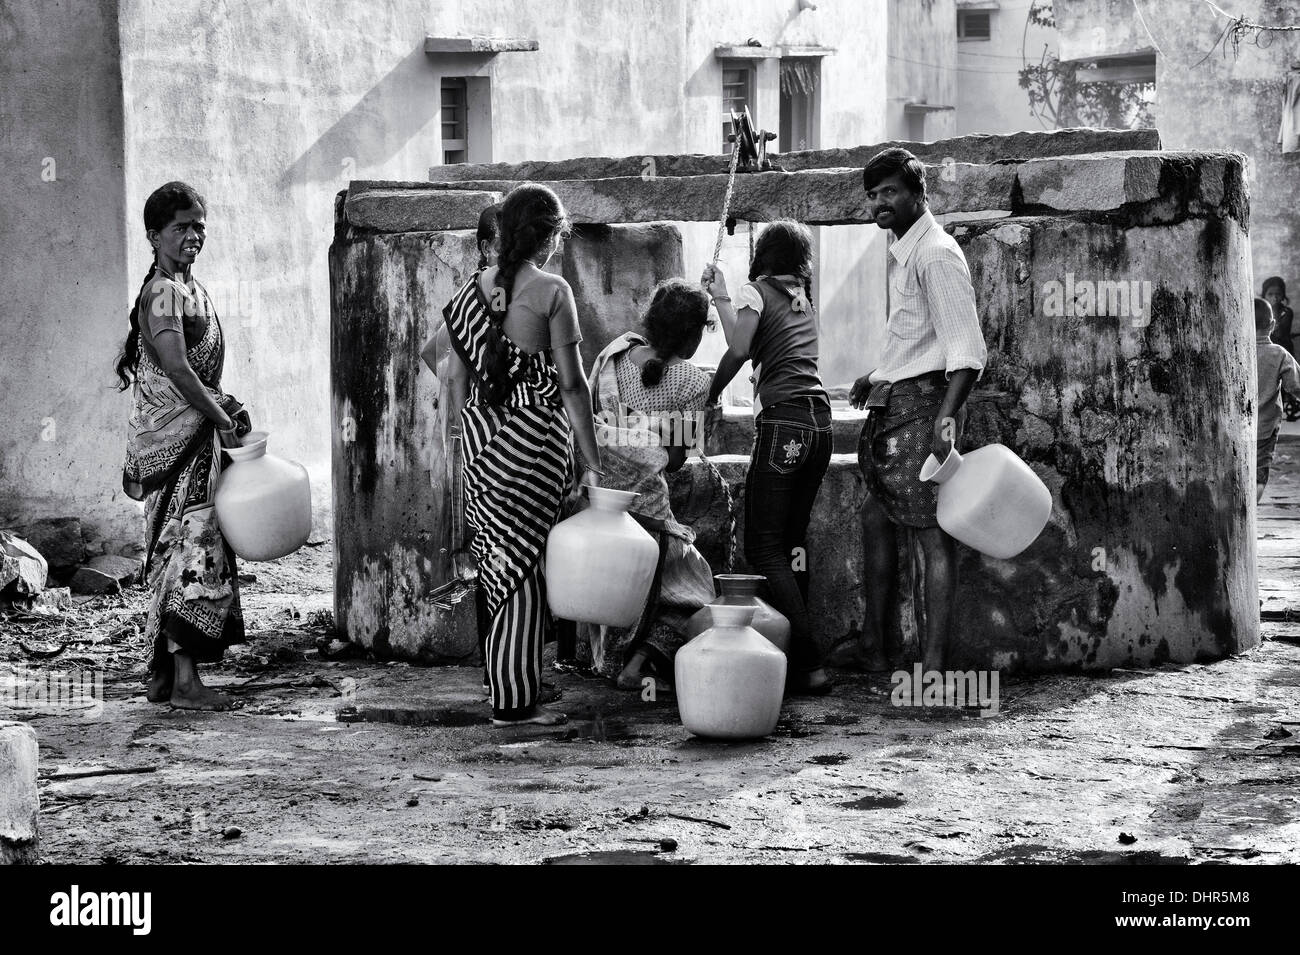 Indian women, men and children drawing water from a well in a rural Indian village street. Andhra Pradesh, India . Monochrome Stock Photo